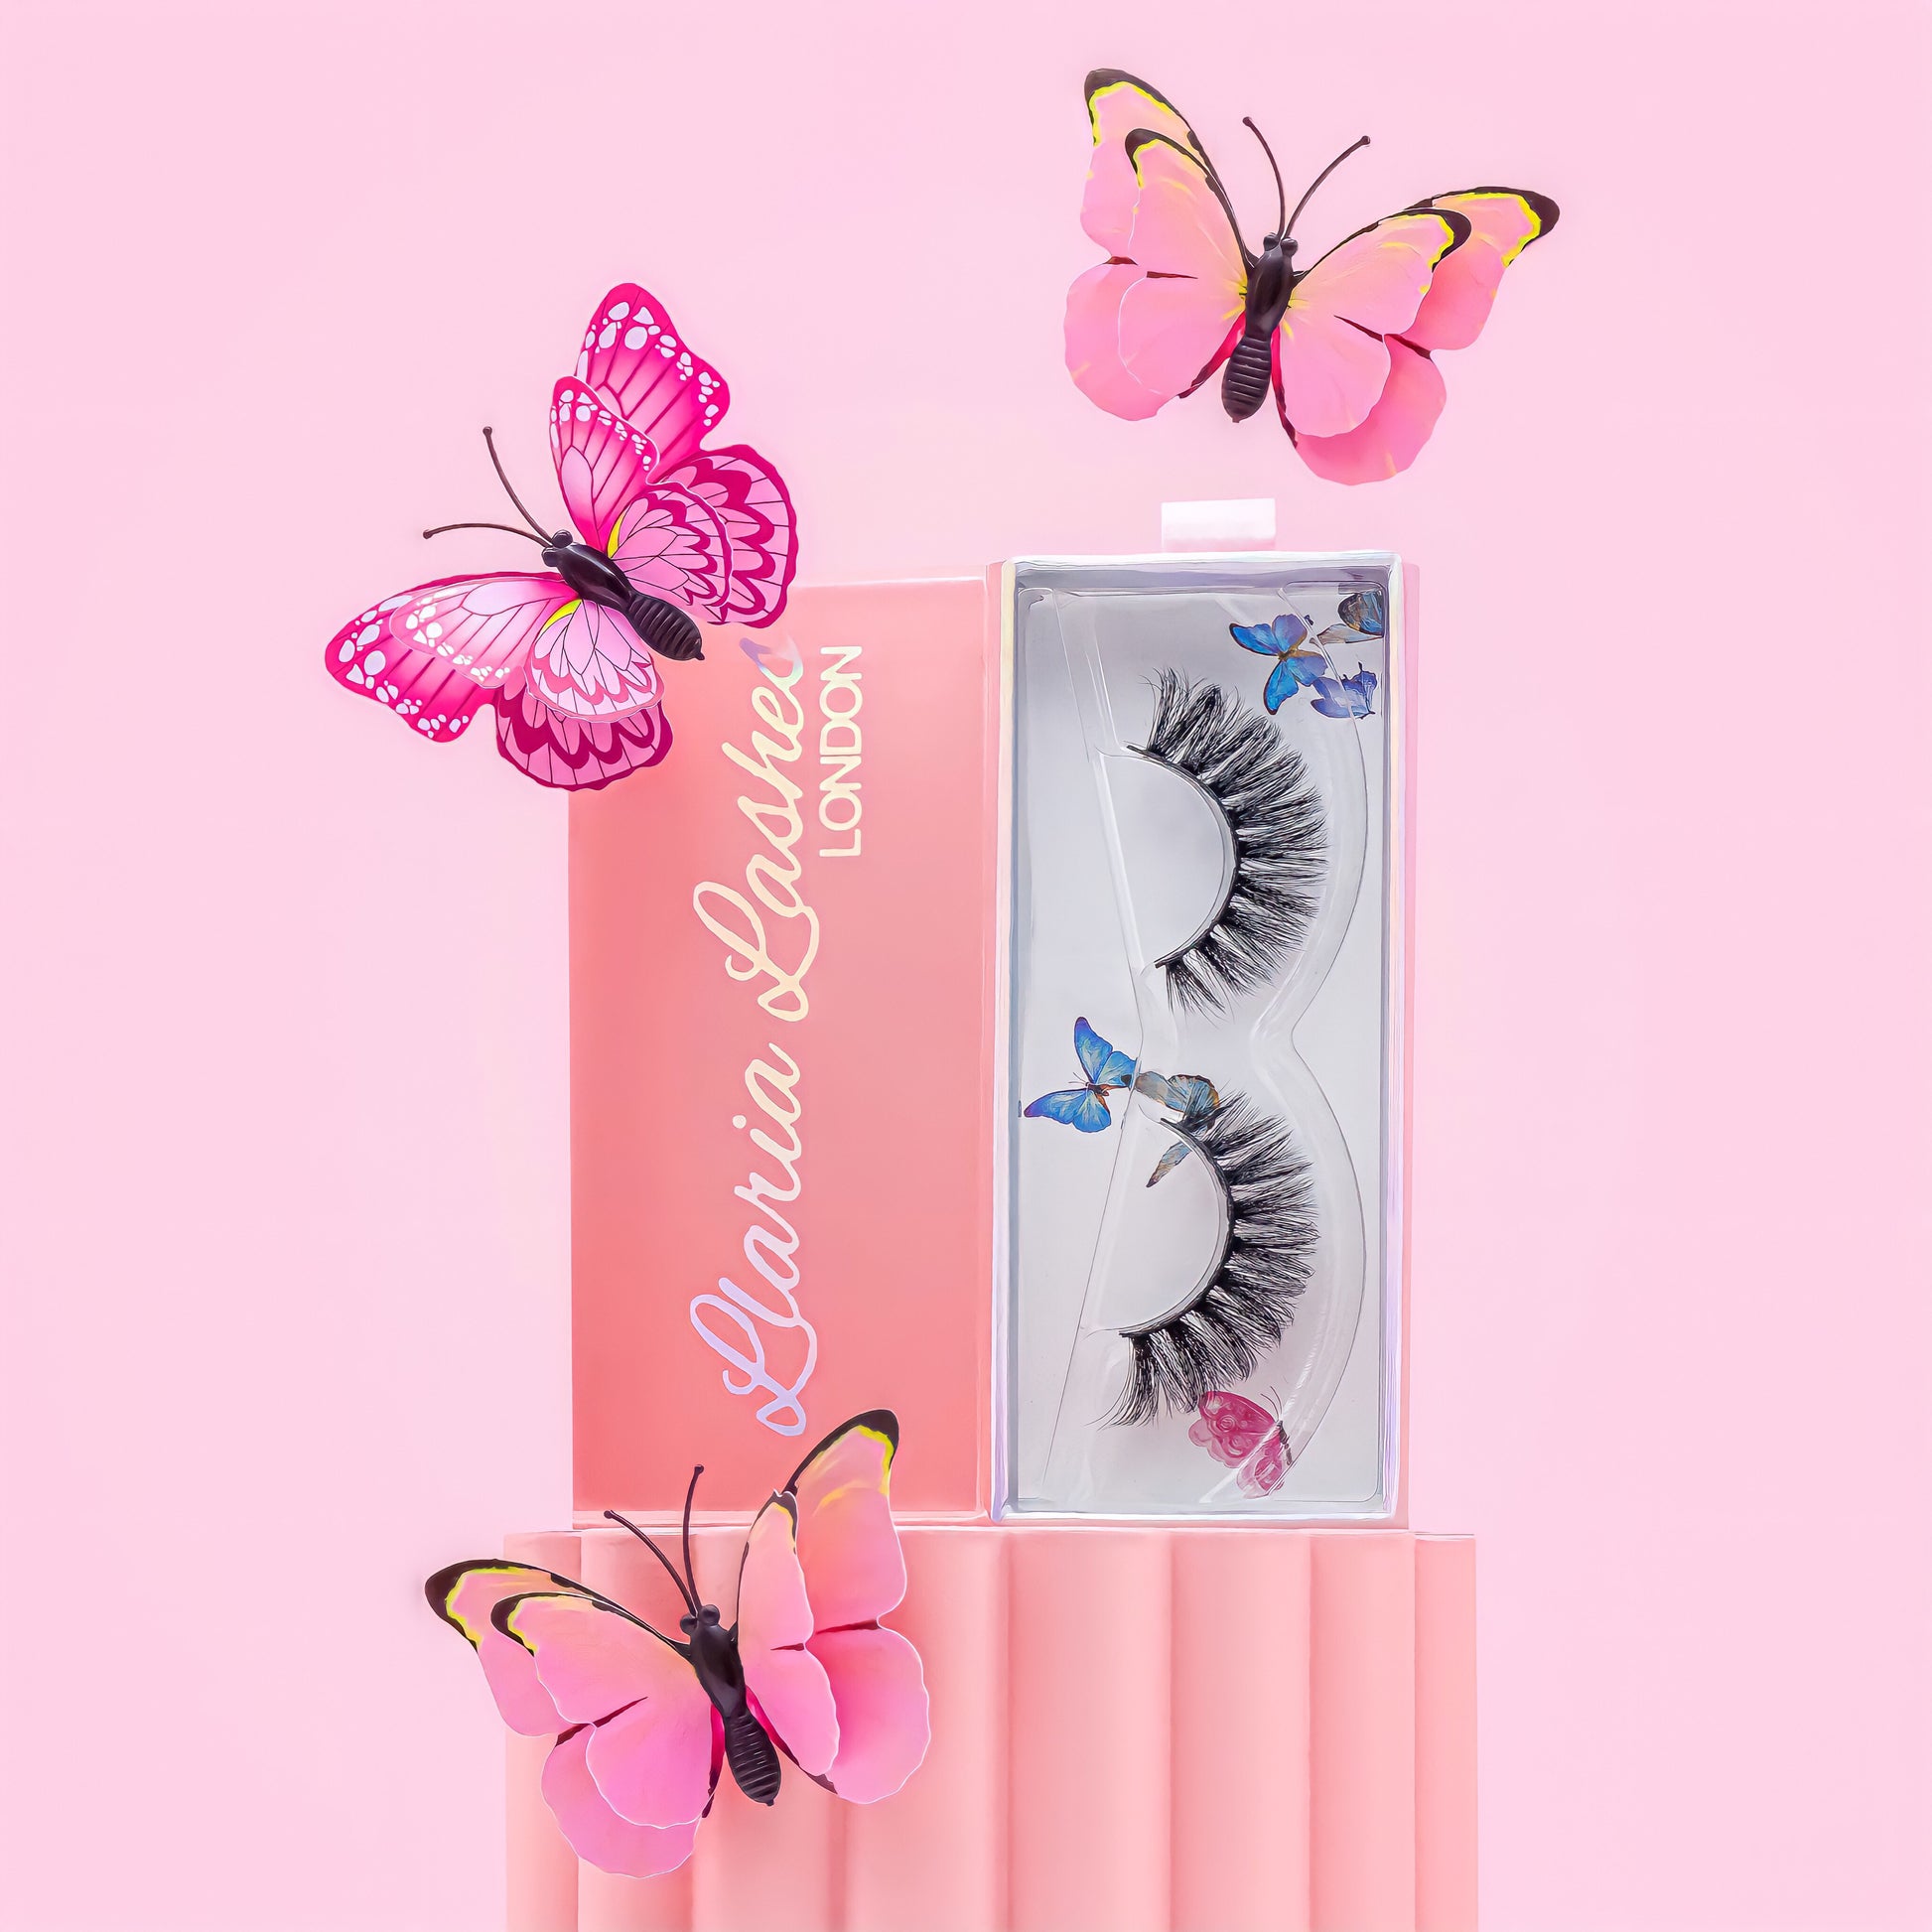 russian d curl strip lashes in lash box with butterflies. 